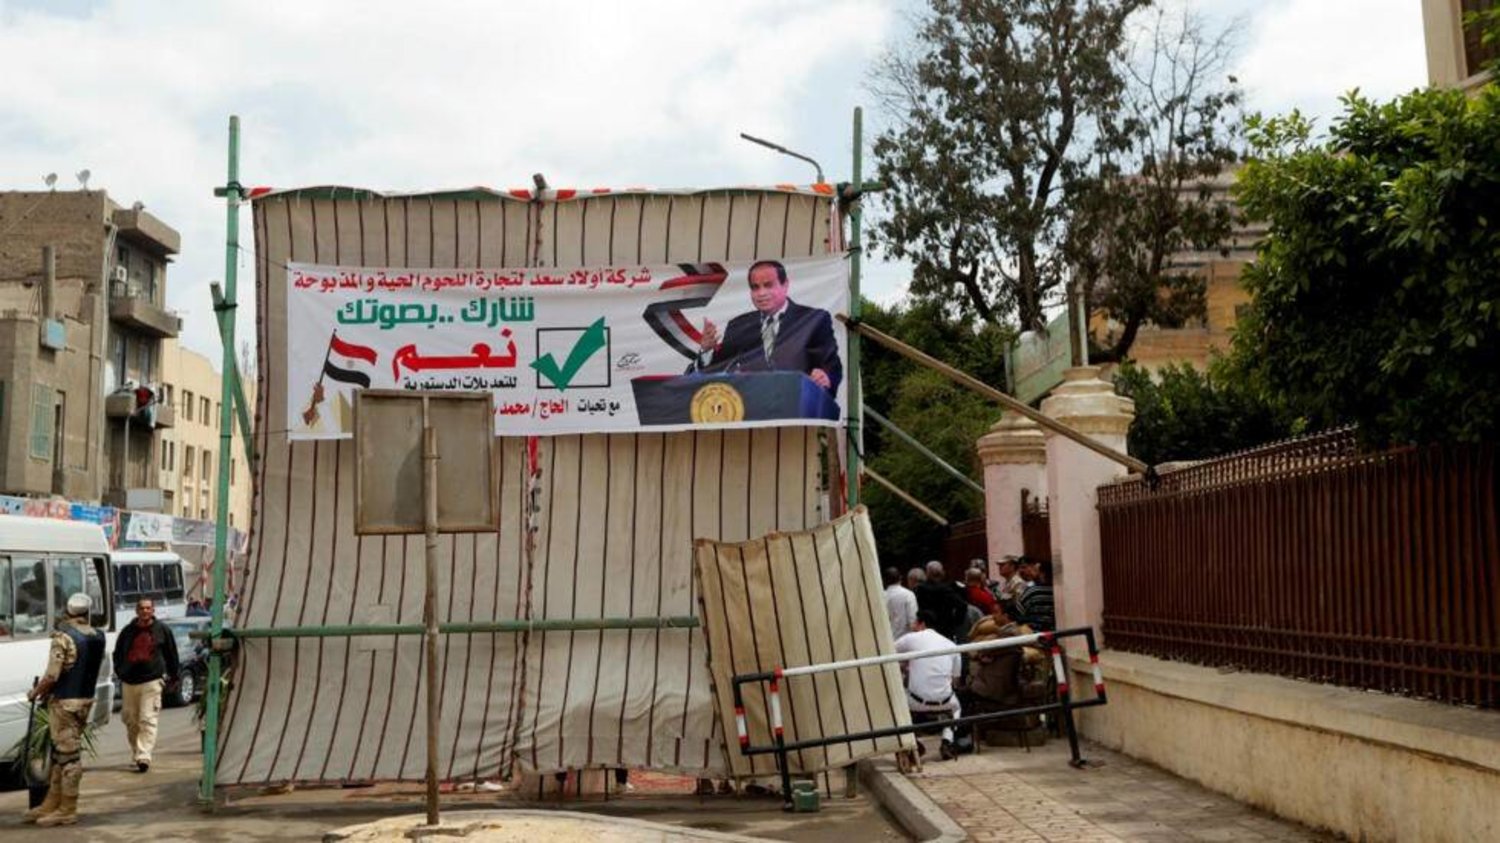 A banner depicting Egyptian President Abdel Fattah al-Sisi is seen outside a polling station during the referendum on draft constitutional amendments (File photo: Reuters)